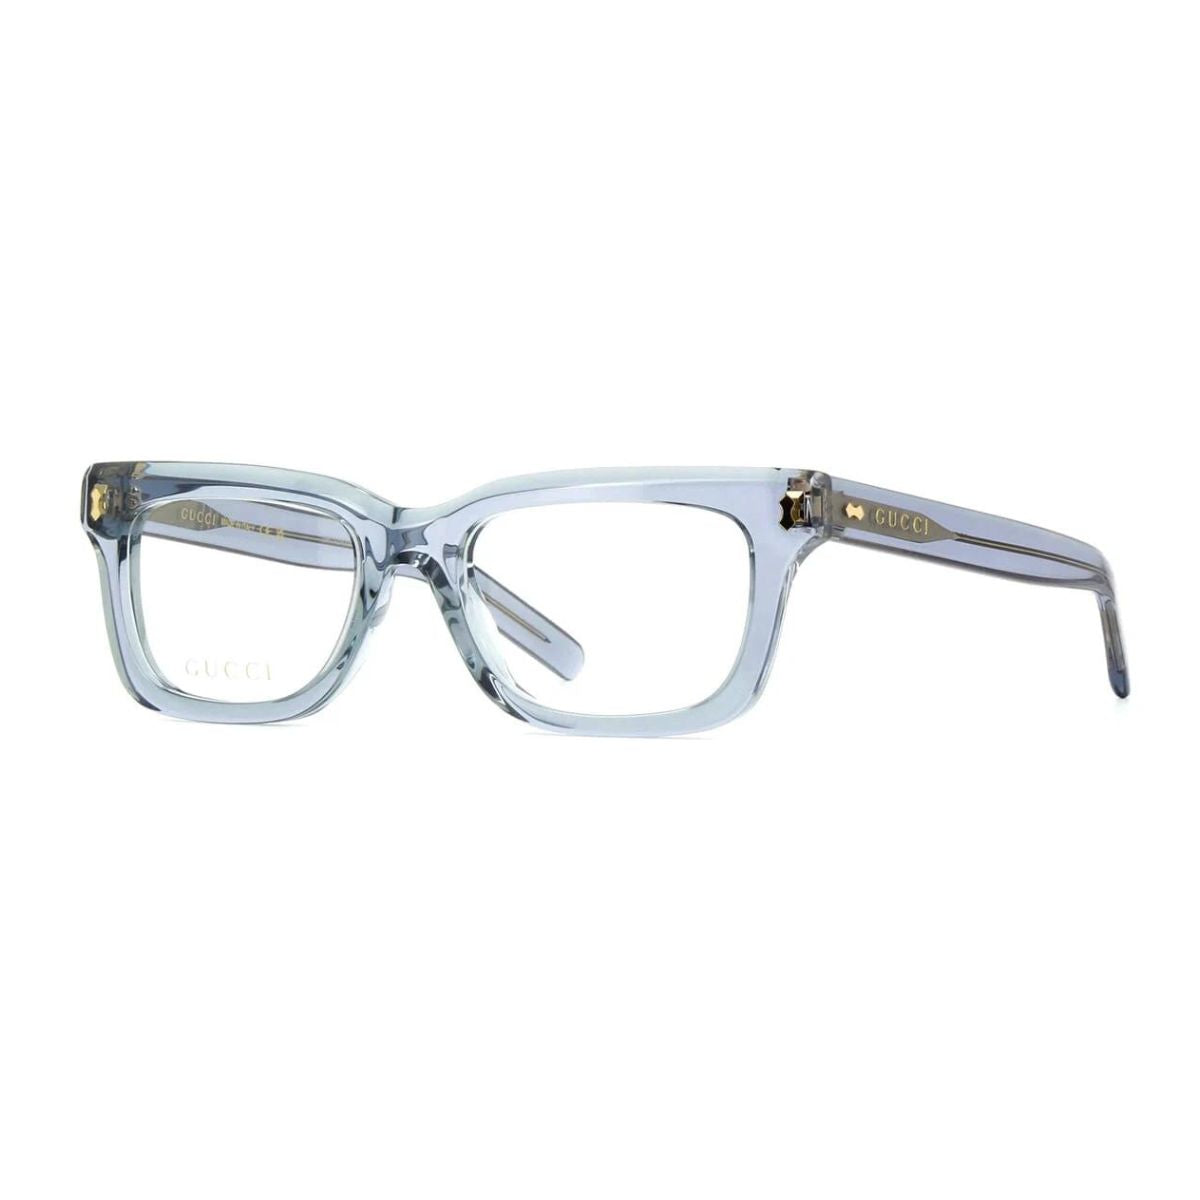 "buy Gucci GG1522O 008 spactacle frame for women's at optorium" 